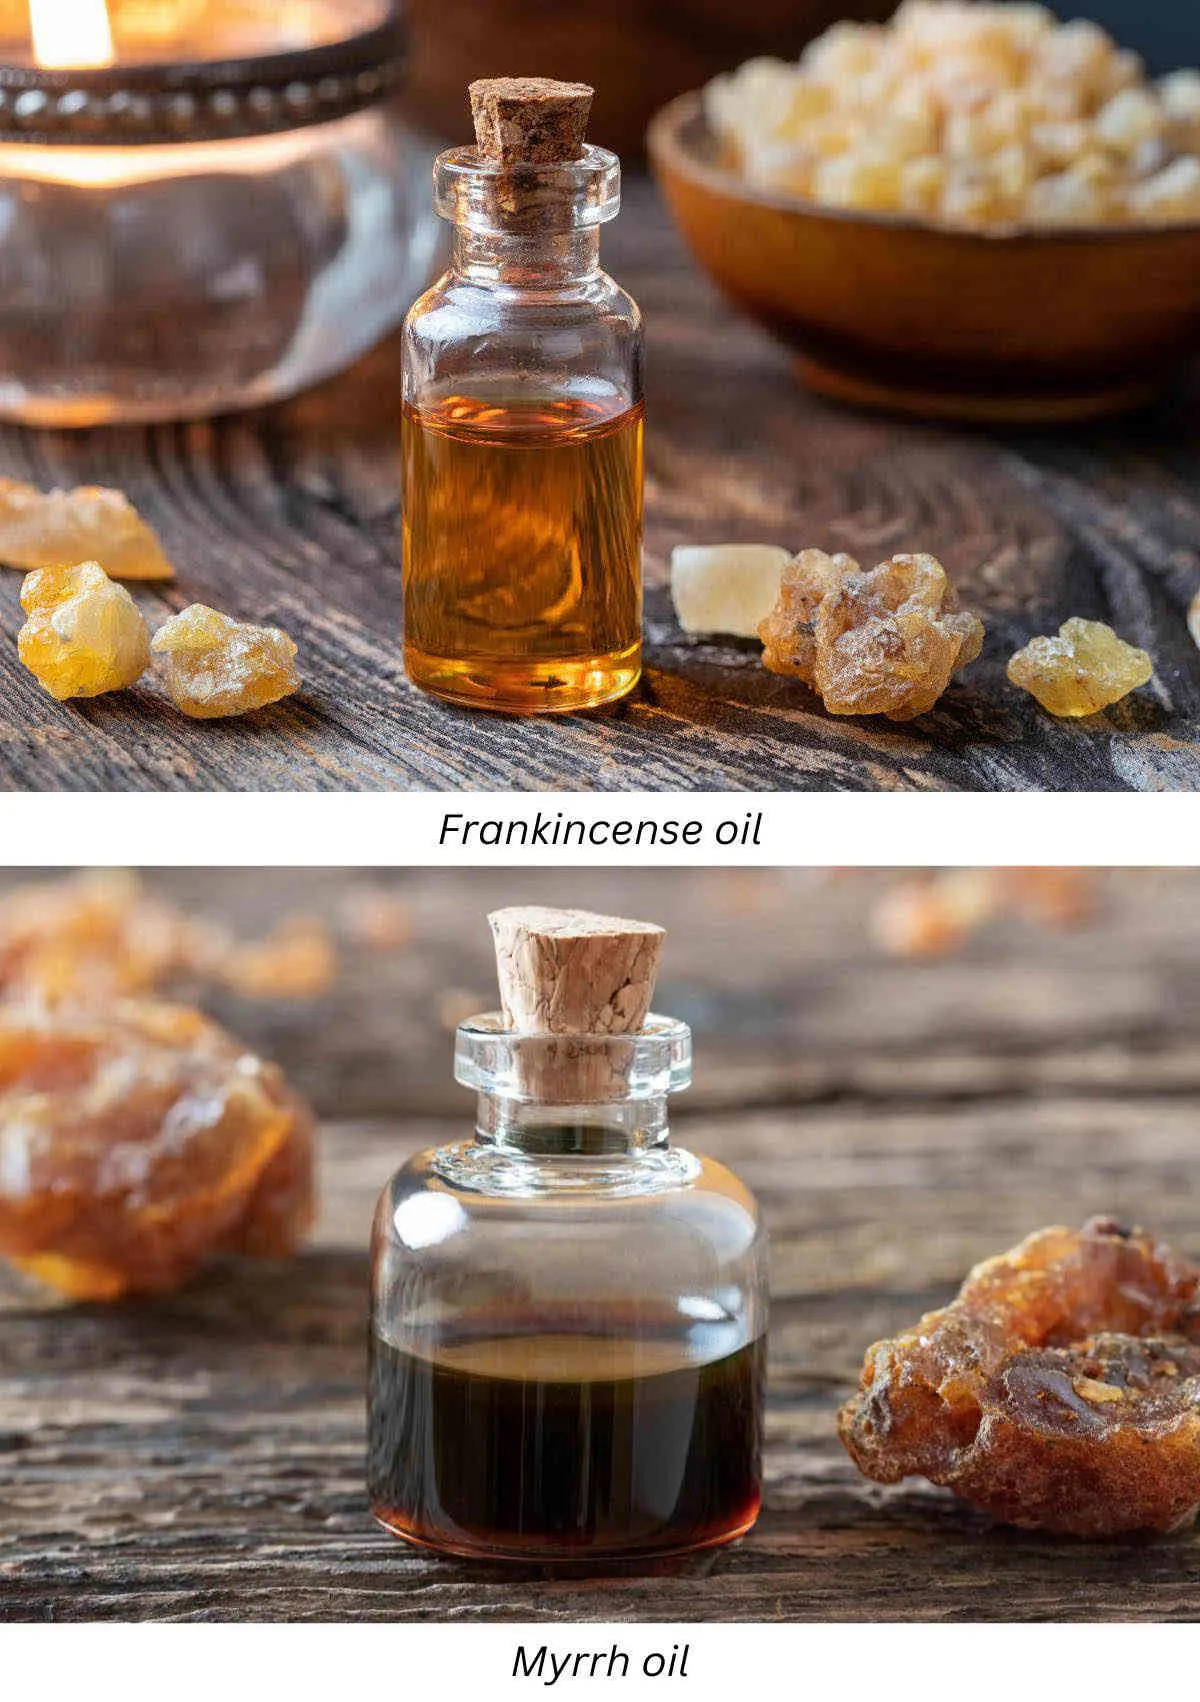 Frankincense oil and myrrh oil for toothache pain inflammation.